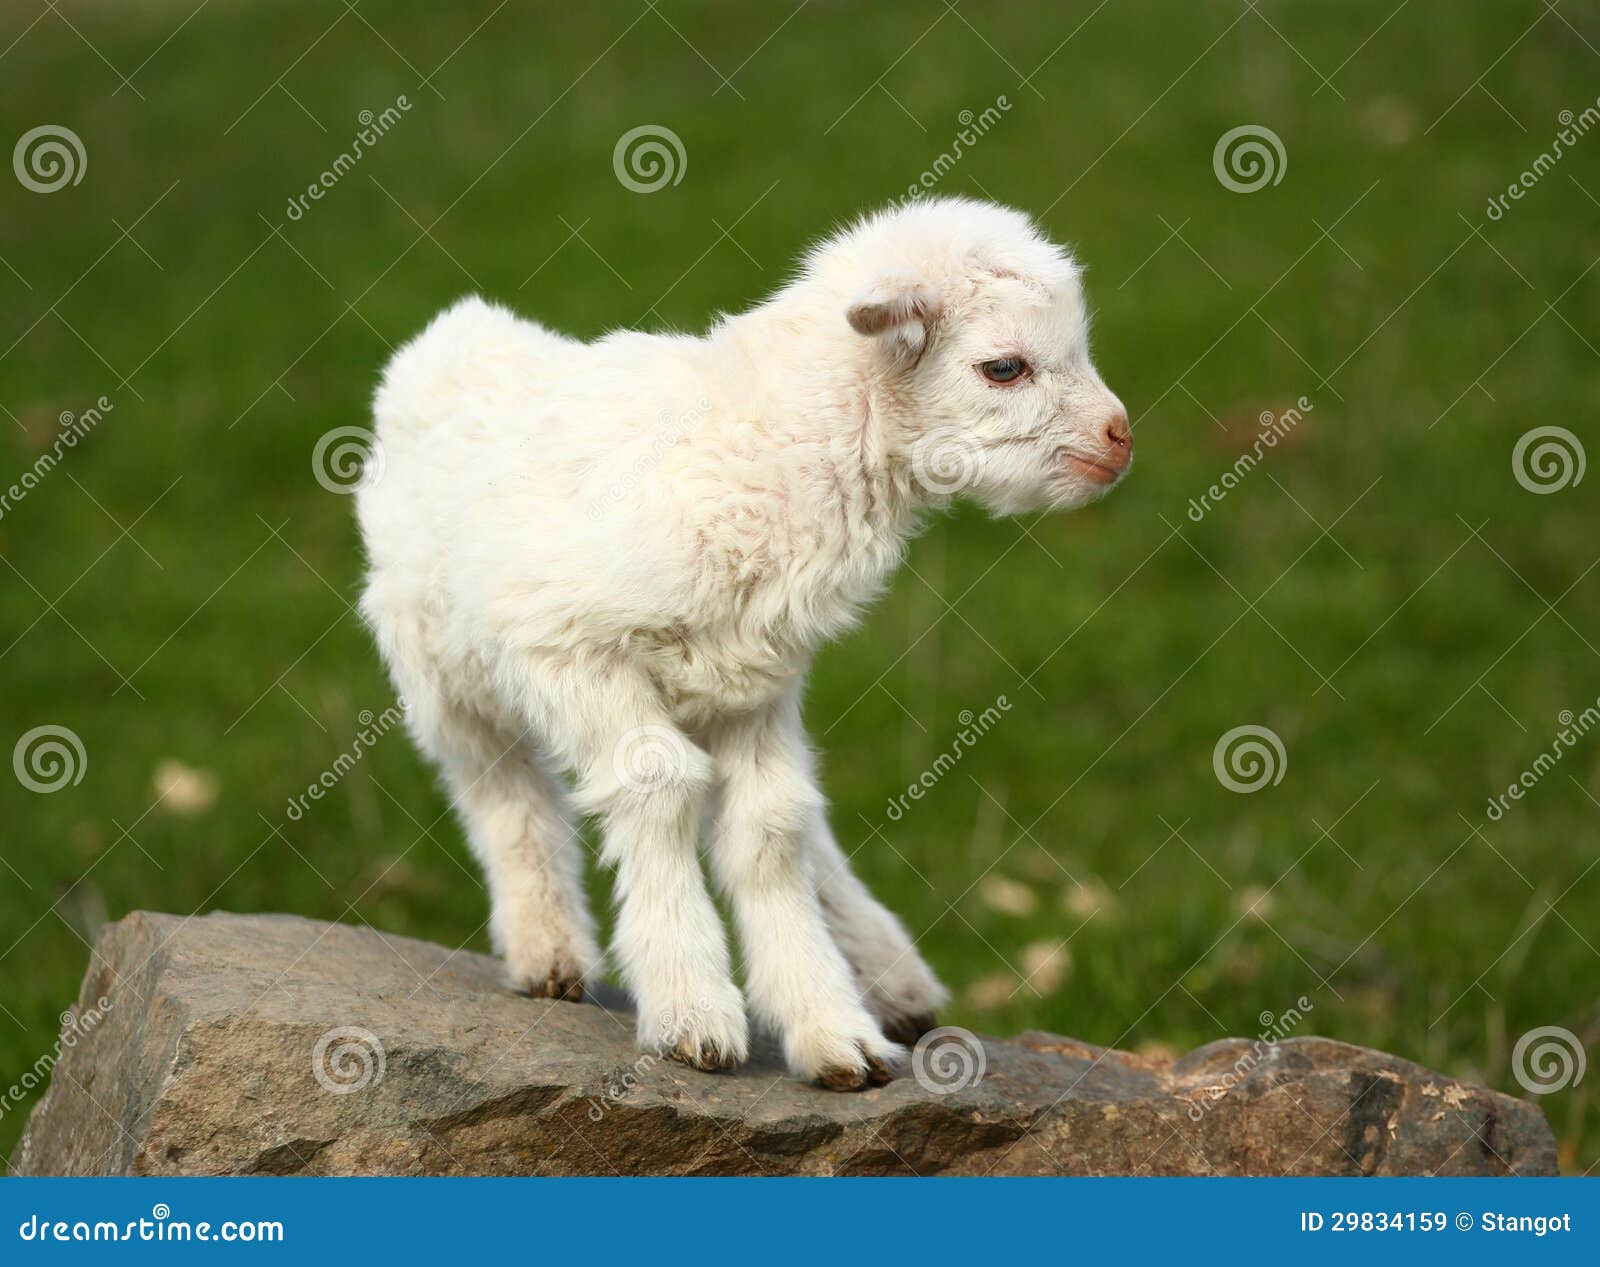 baby goat on a rock